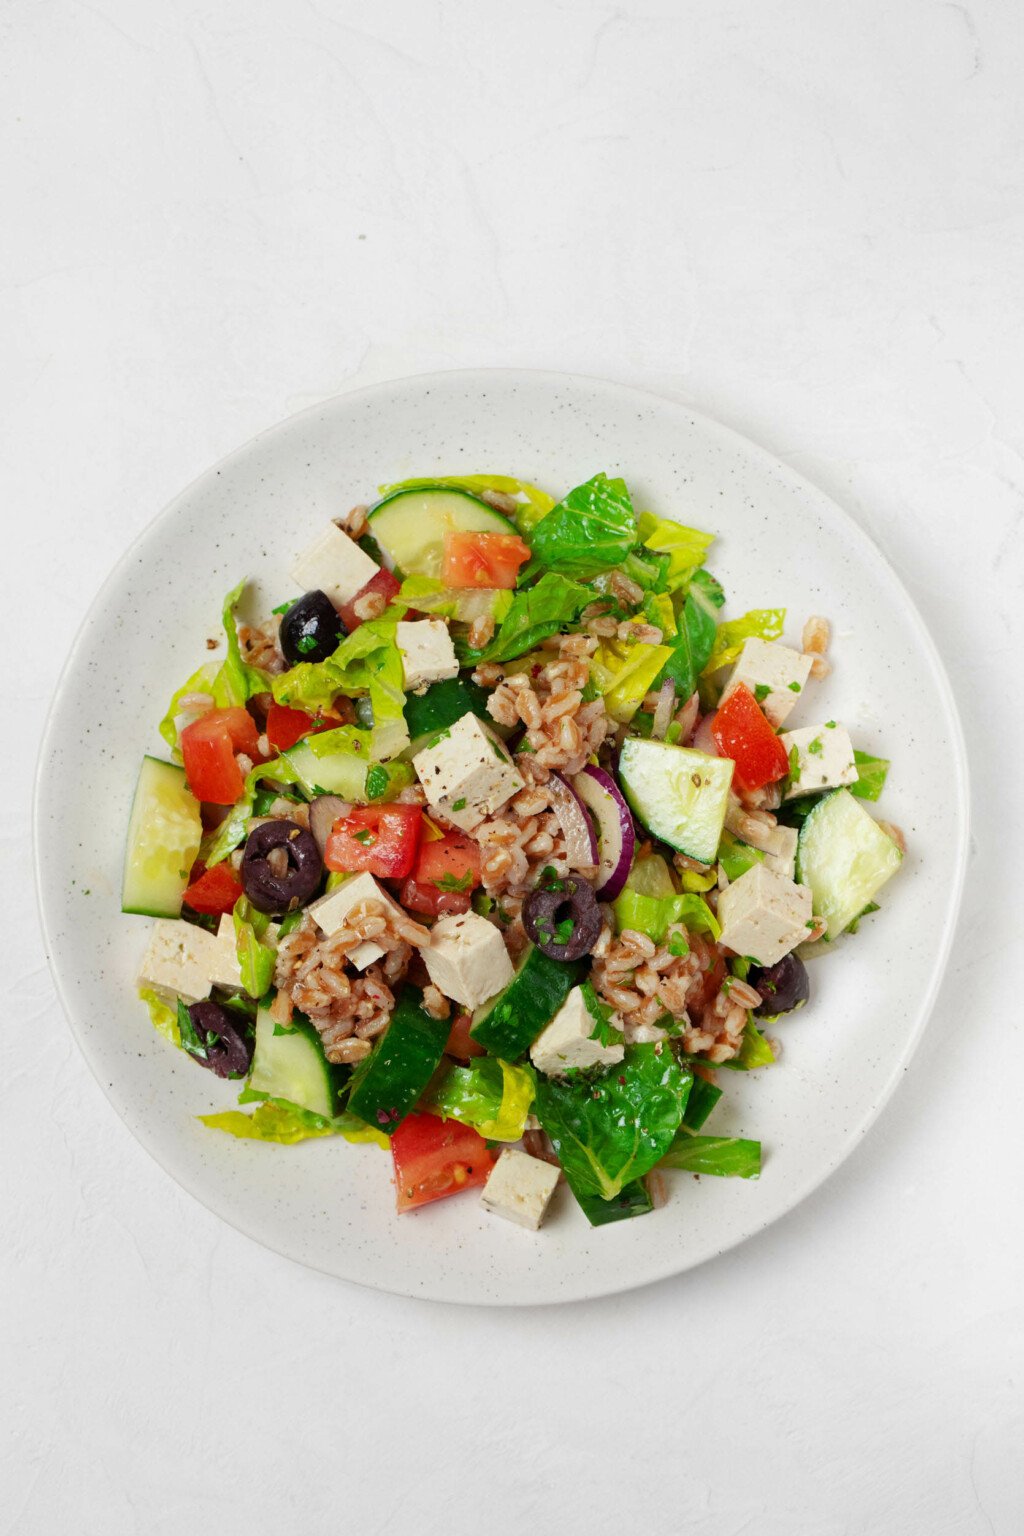 A plant-based, summer salad has been created with cubes of tofu that are intended to look and taste like cubed feta cheese. It rests on a round white plate.